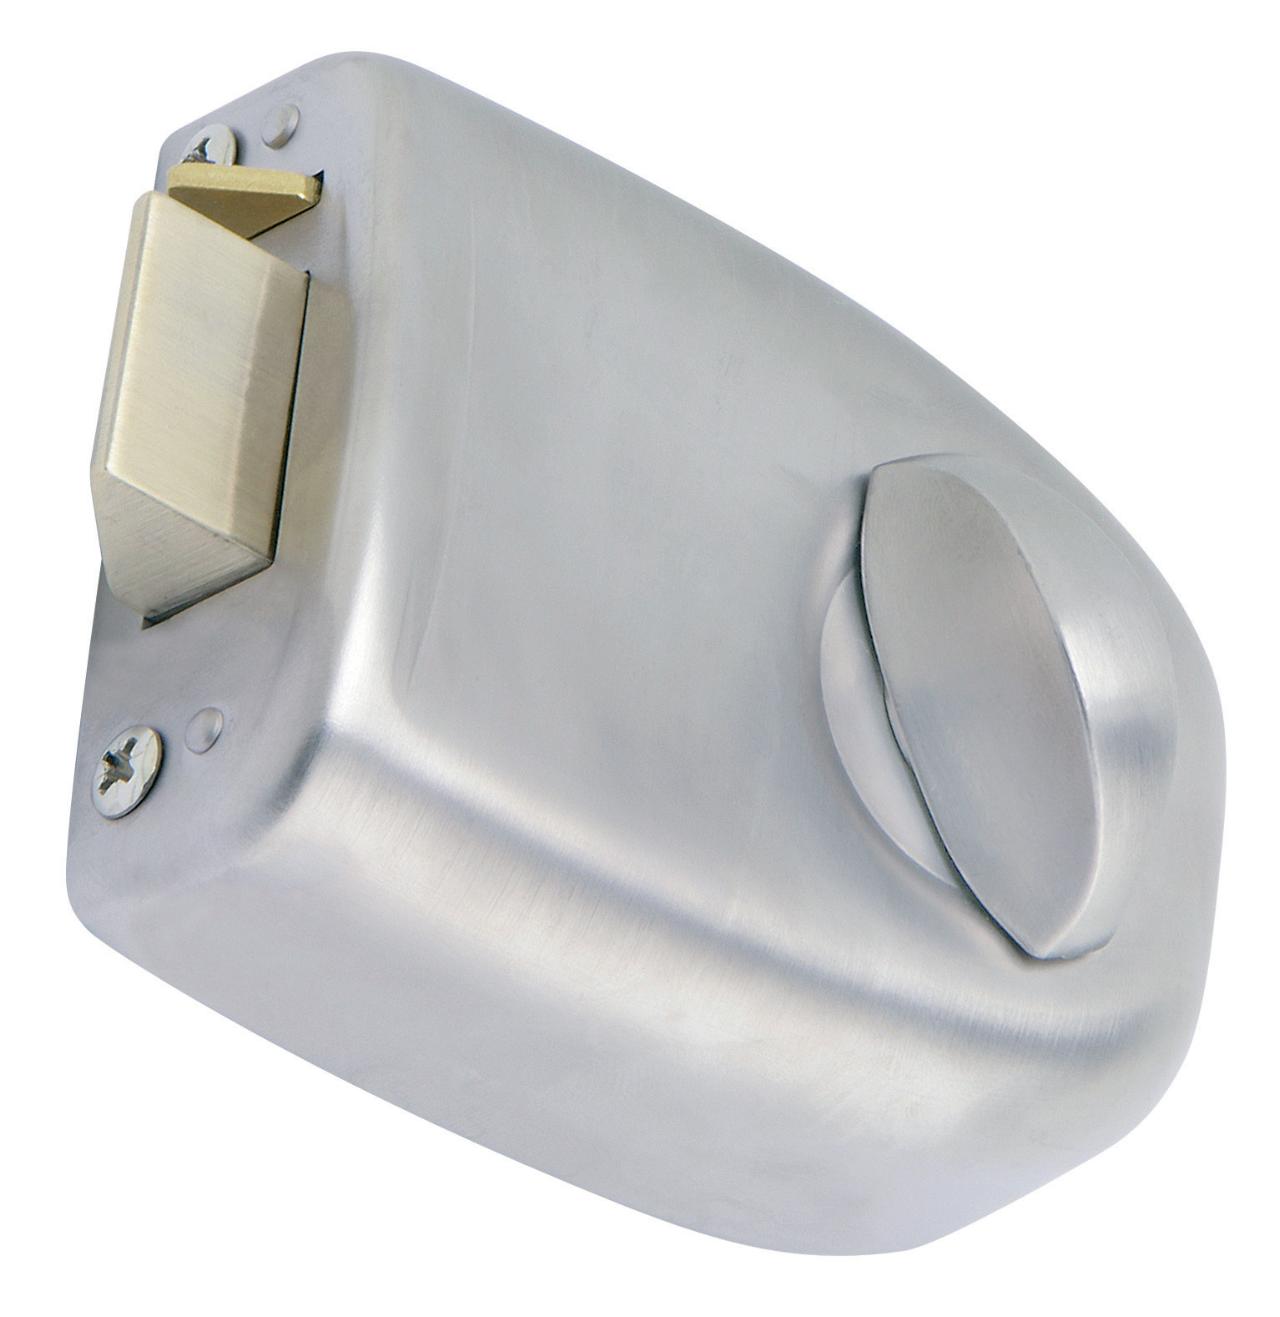 RD1601 Box lock with cylinder and end plate, stainless look cylinder and box lock